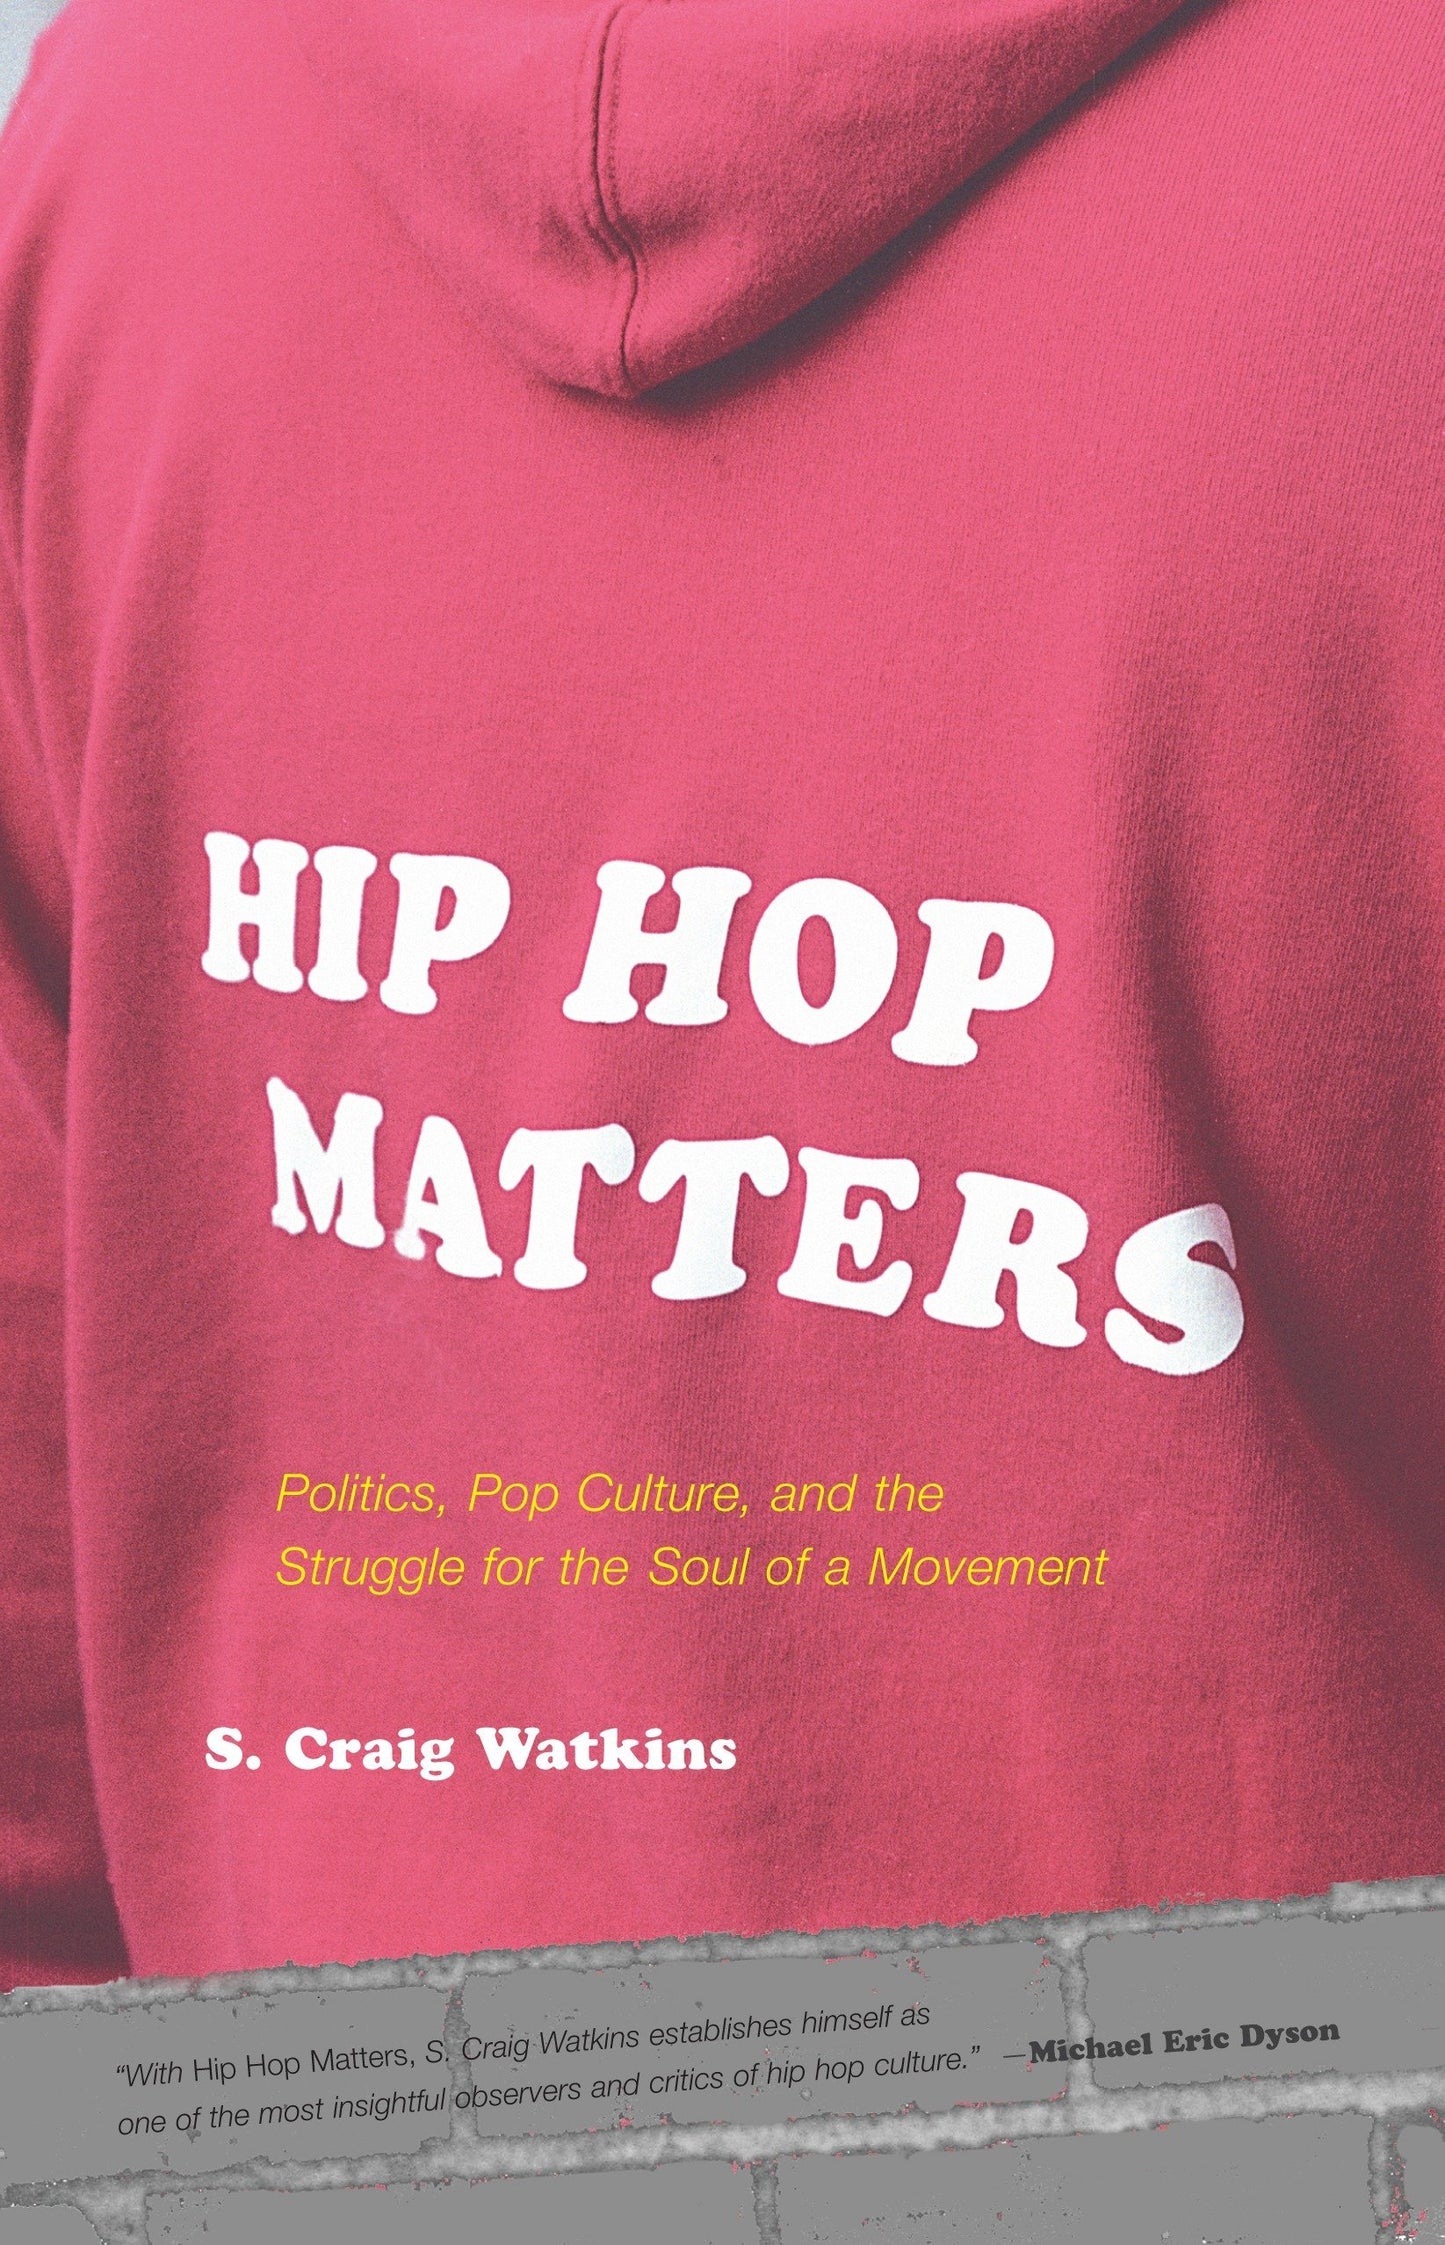 Hip Hop Matters // Politics, Pop Culture, and the Struggle for the Soul of a Movement